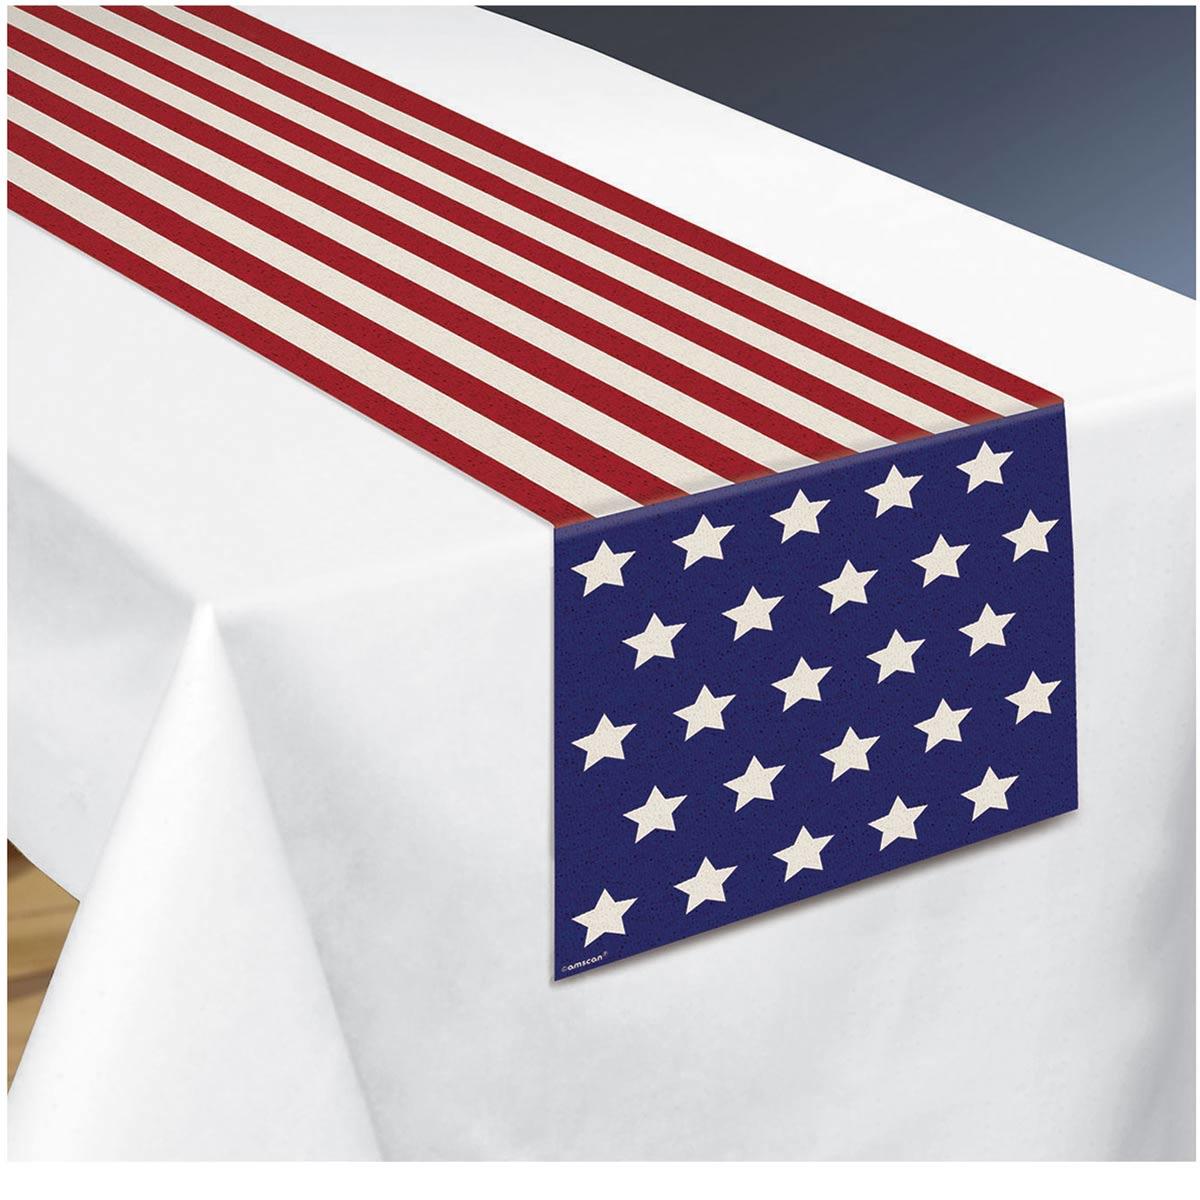 American Flag USA Fabric Table Runner by Amscan 570025 available here at Karnival Costumes online party shop